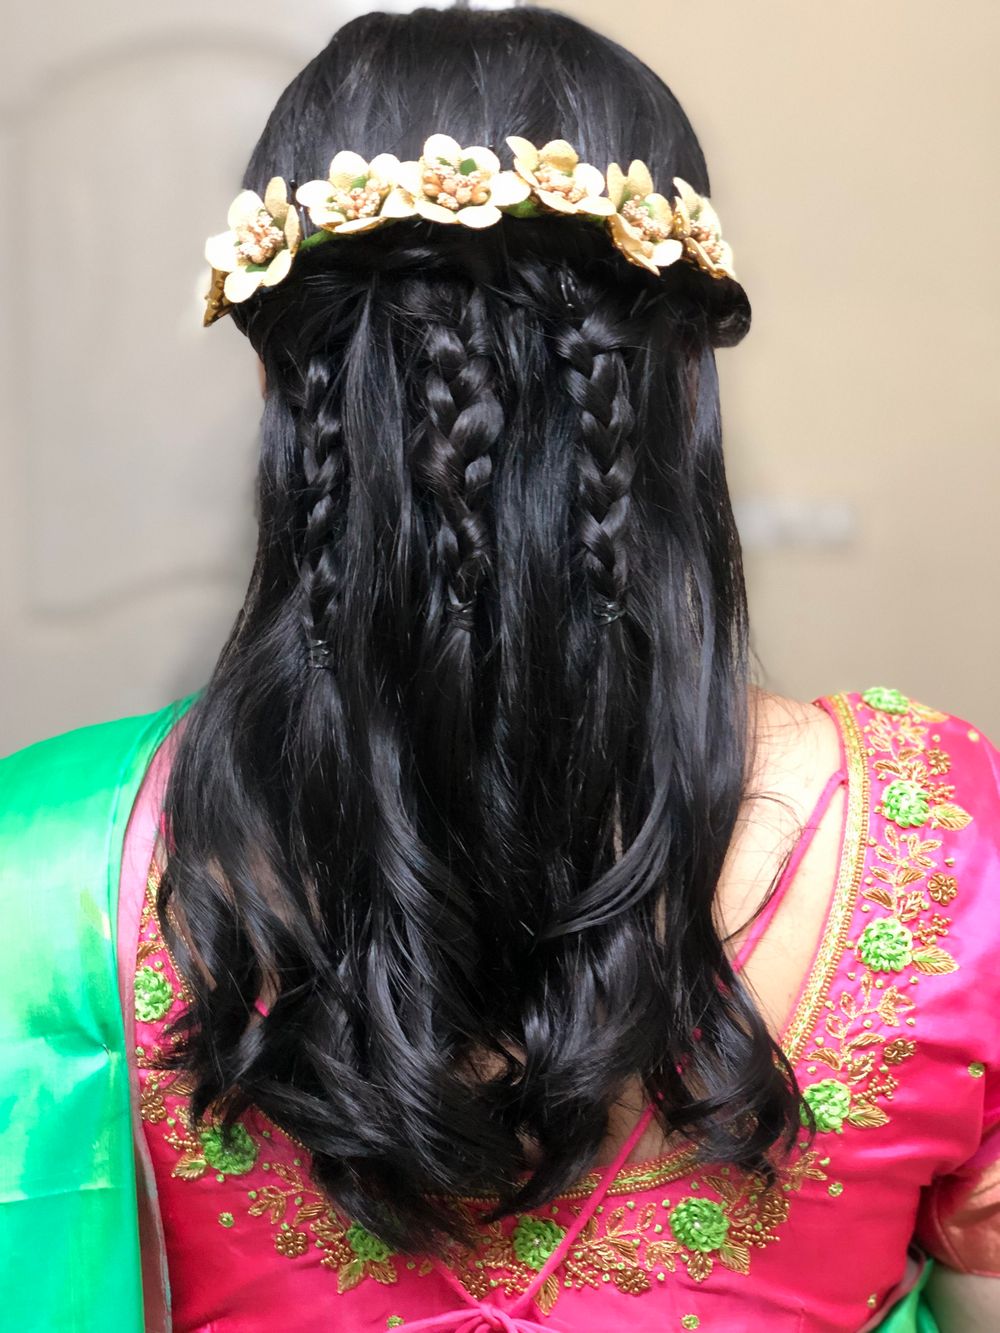 Photo From Hairstyle Goals - By Makeup & Hair by Shwetha Shetty